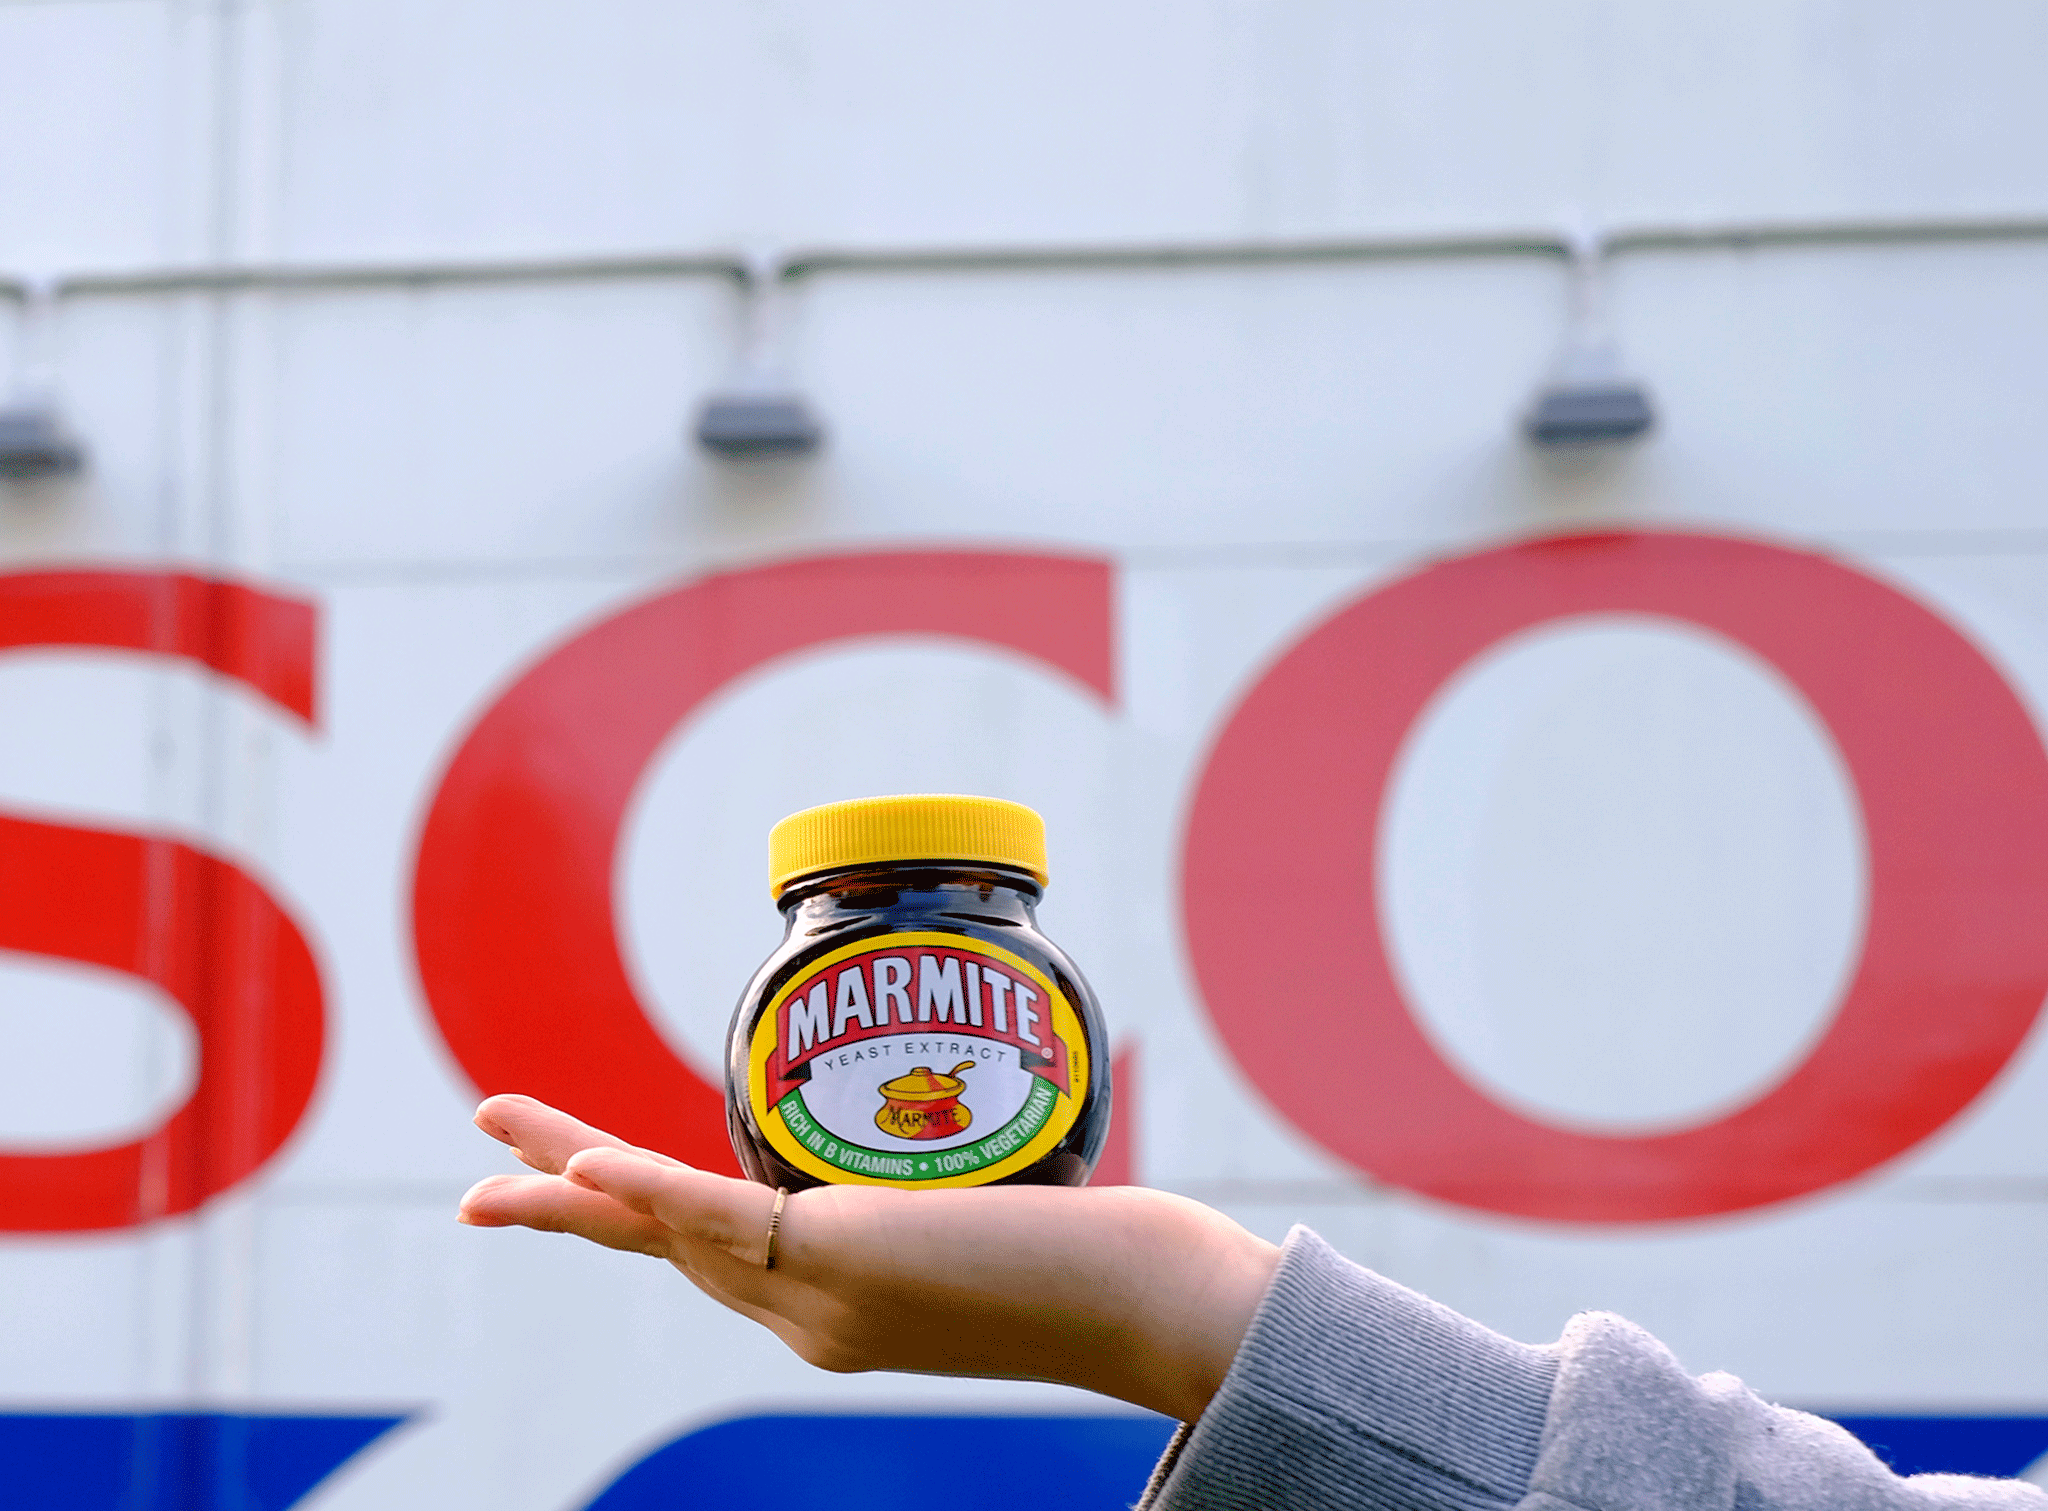 Tesco took brands such as Marmite and PG Tips off its shelves after Unilever tried to raise prices by 10 per cent